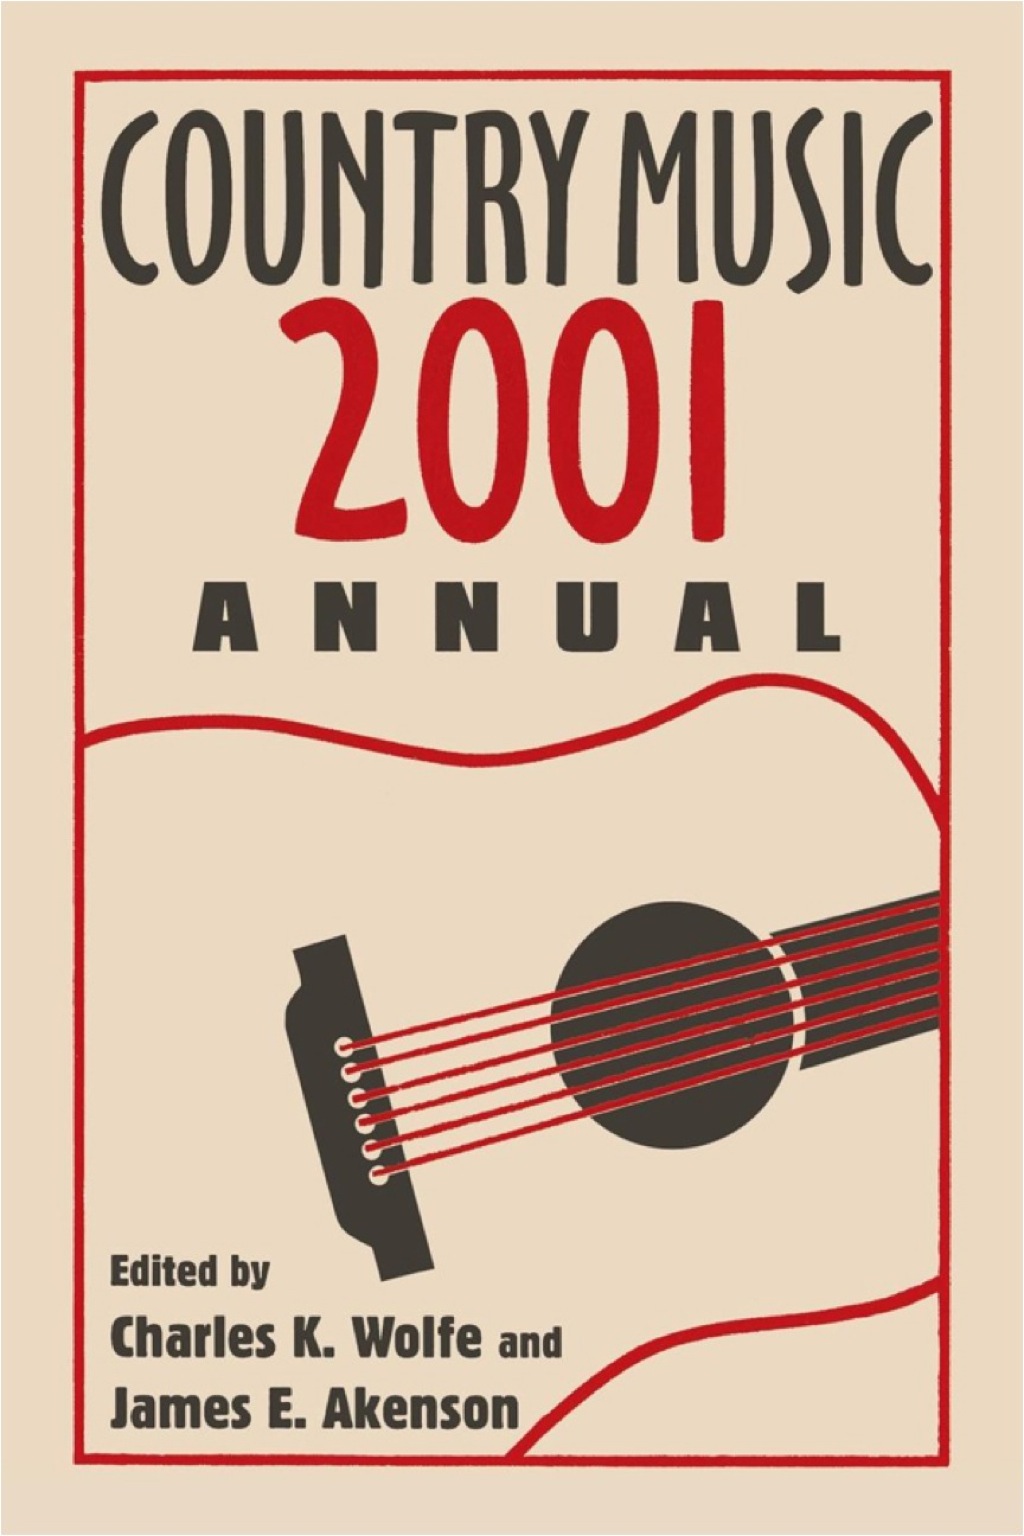 Country Music Annual 2001 (eBook) - Charles K. Wolfe,